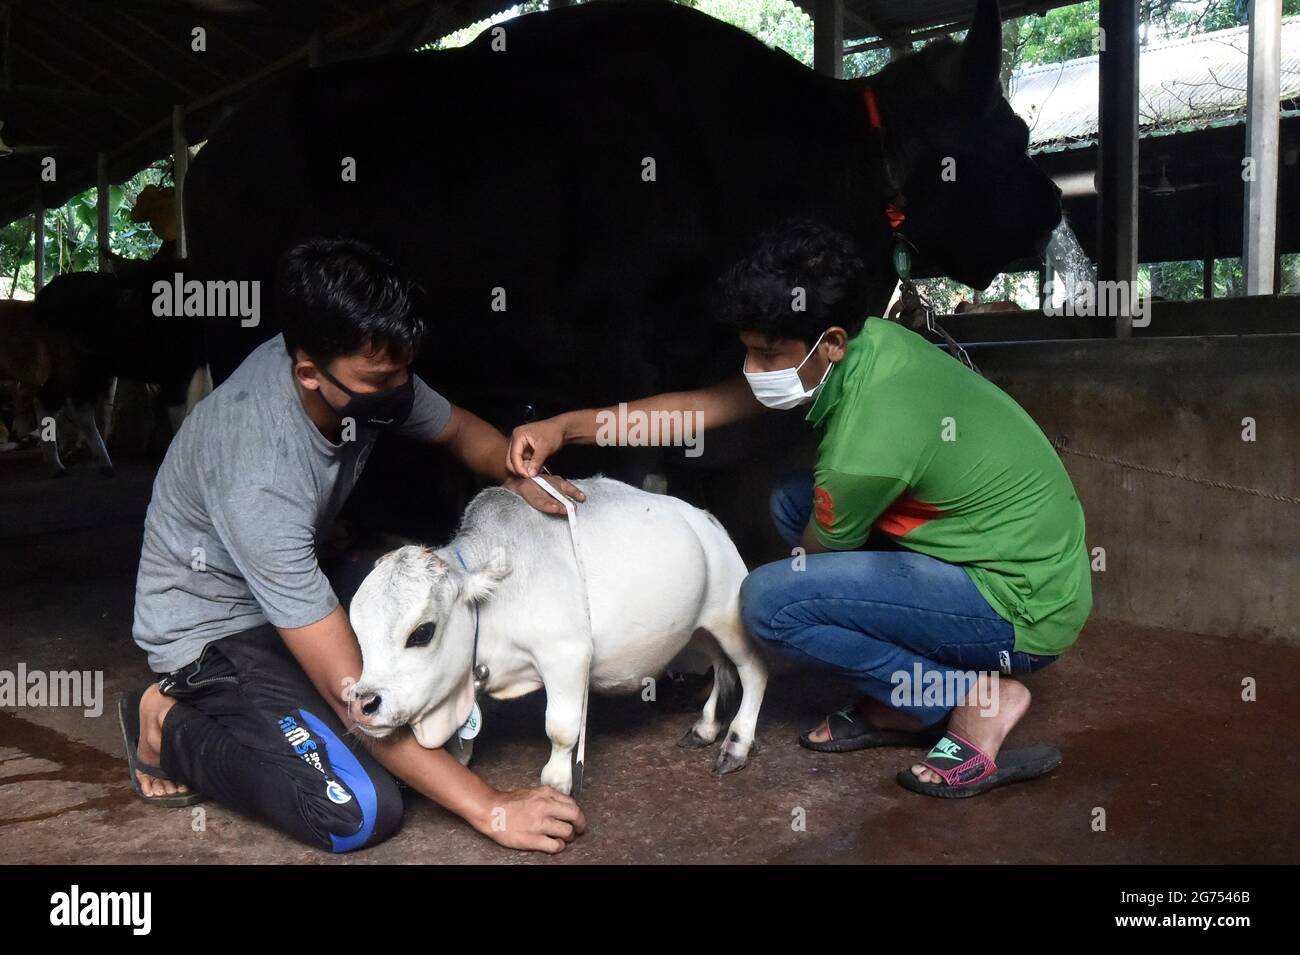 (210711) -- SAVAR, July 11, 2021 (Xinhua) -- Two men measure a dwarf cow called Rani at a farm in Savar on the outskirts of Dhaka, Bangladesh, July 8, 2021.  The 26-inch long, 26-kg weigh cow called Rani, or Queen, has been applied for the Guinness Book of Records, with its owner claiming it to be the world's smallest cow.   TO GO WITH 'Feature: 'World's smallest' dwarf cow draws crowds in Bangladesh' (Xinhua) Stock Photo